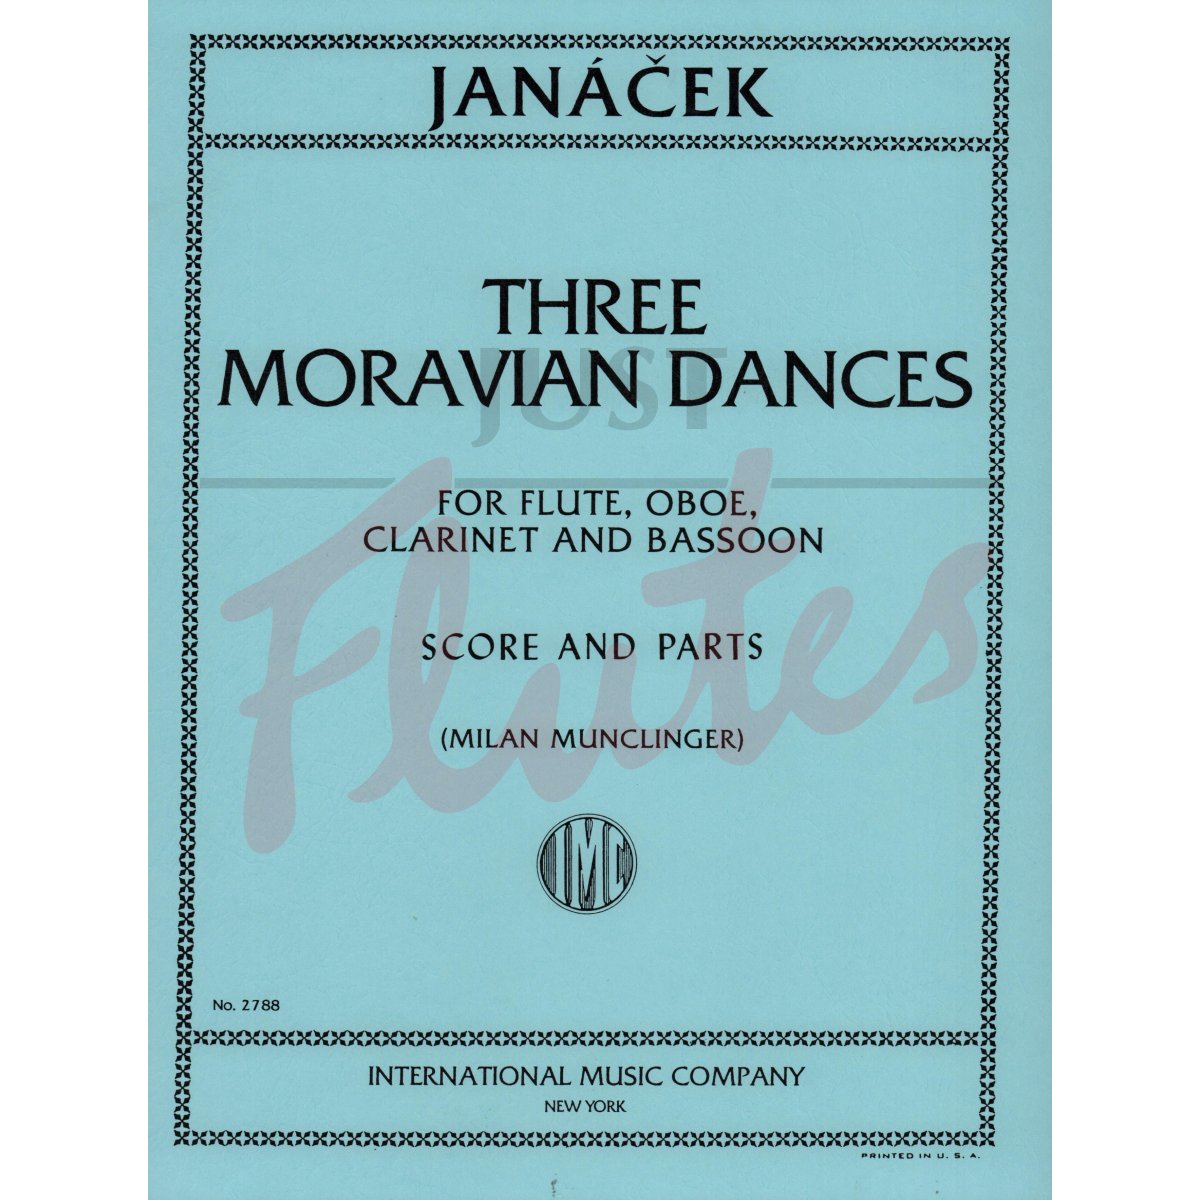 Three Moravian Dances for Flute, Oboe, Clarinet and Bassoon